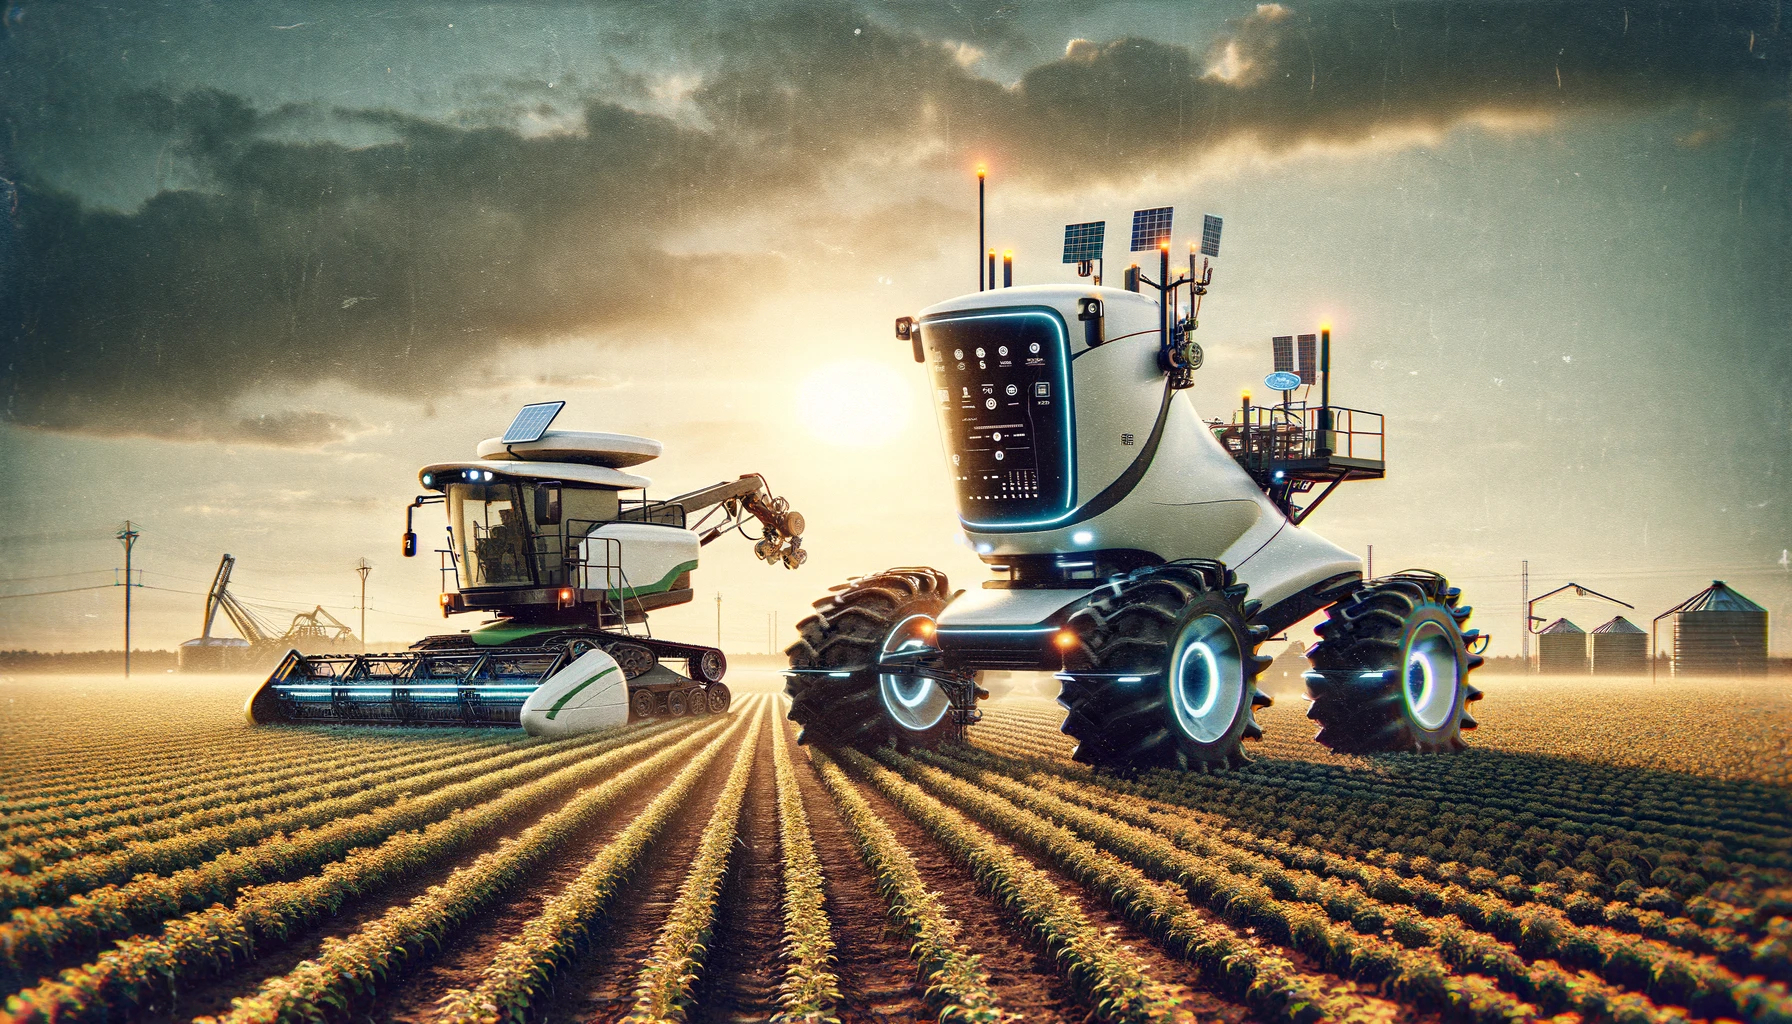 Futuristic agricultural machinery illustrates the use of AI in the food industry, with advanced technologies for efficient and sustainable food production.